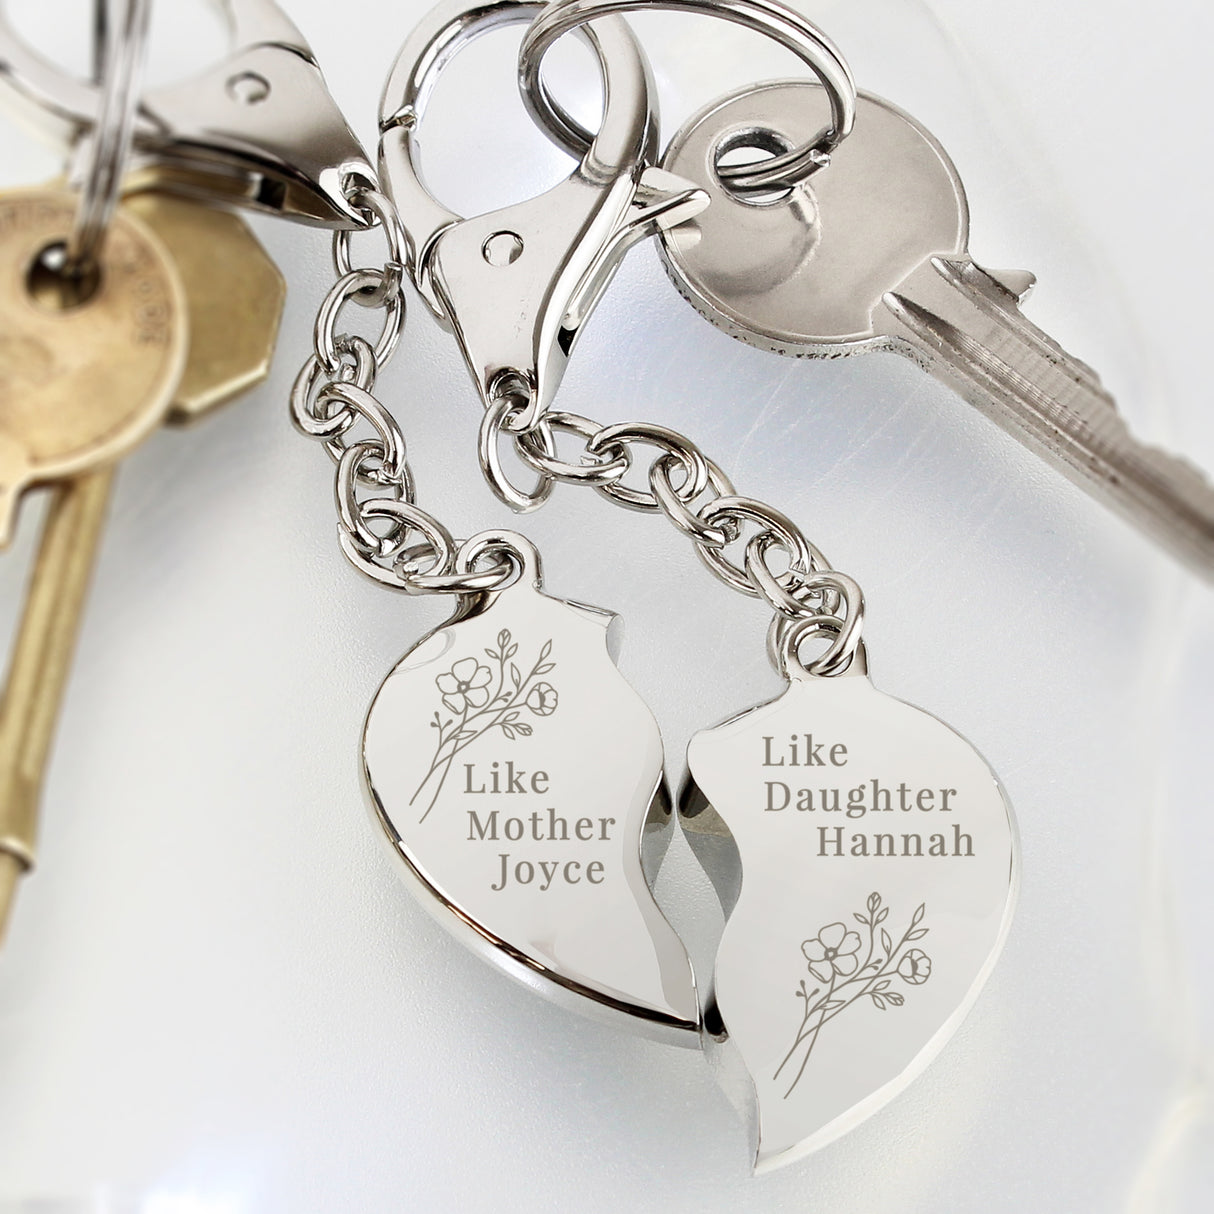 Mother & Daughter Sharing Keyrings - Gift Moments